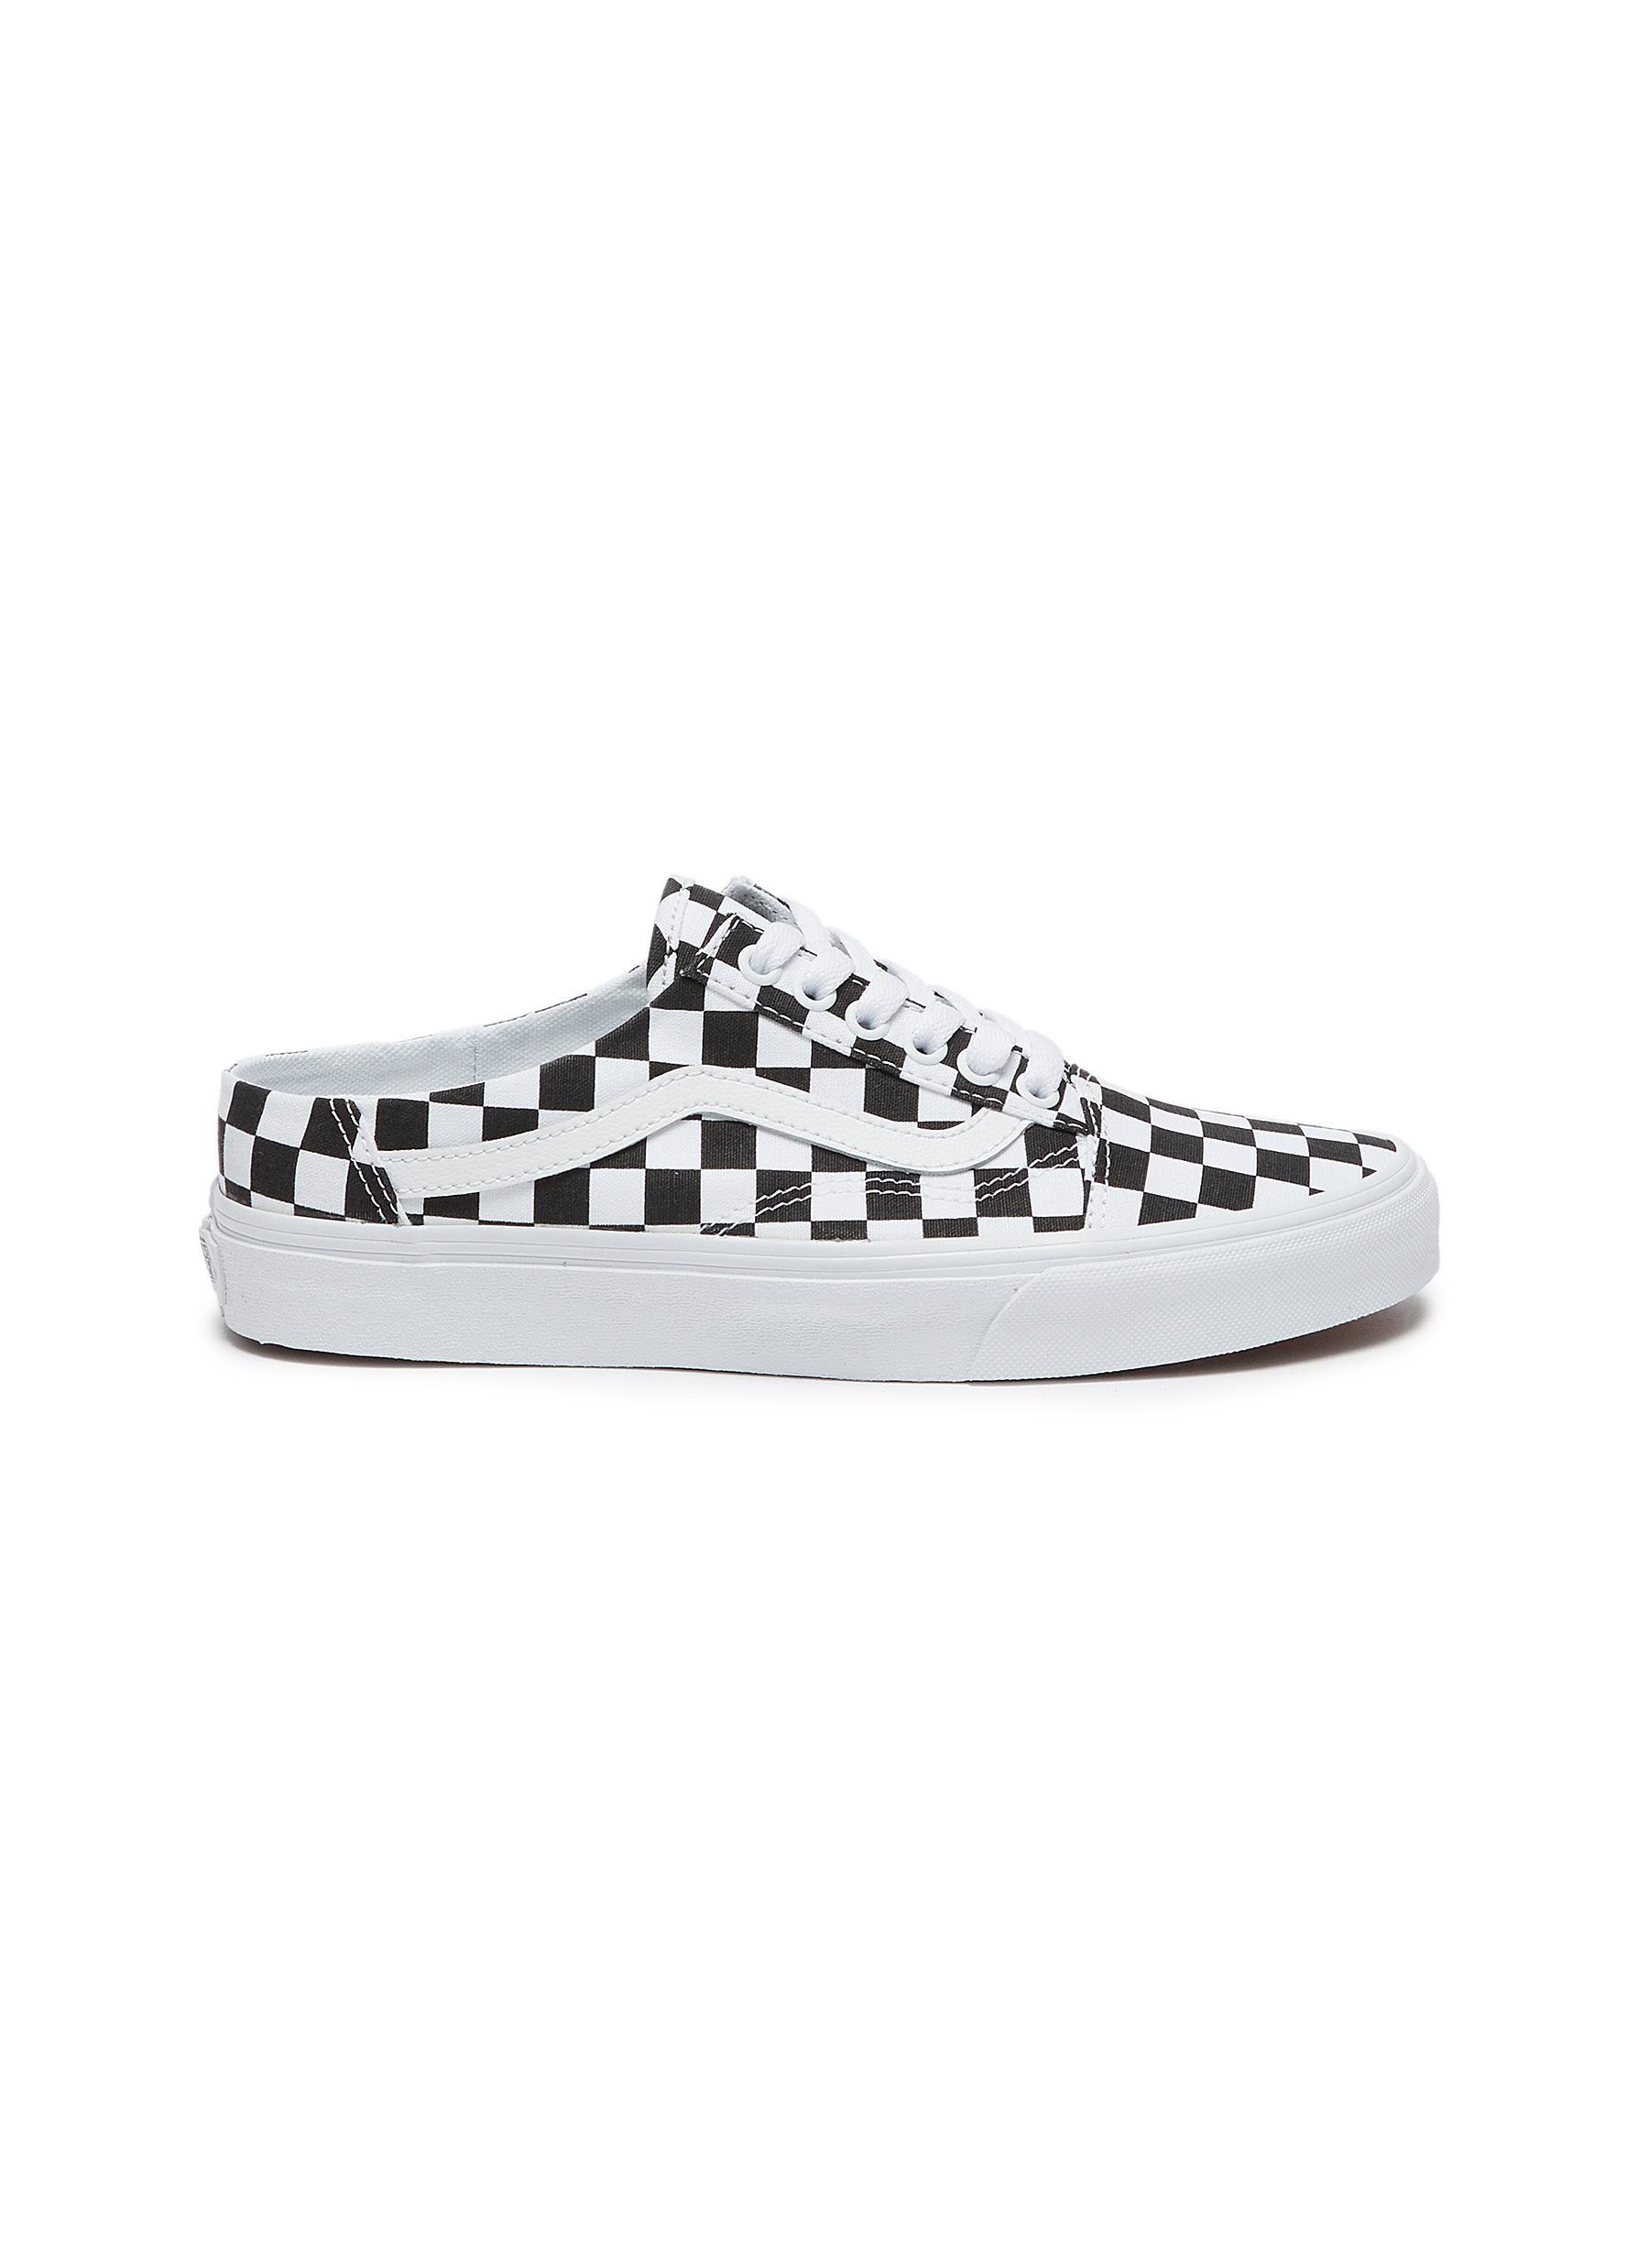 Vans Old Checkered Slip-on Mules Women Shoes Sneakers Low-top Old Skool' Checkered Slip-on Mules in | Lyst